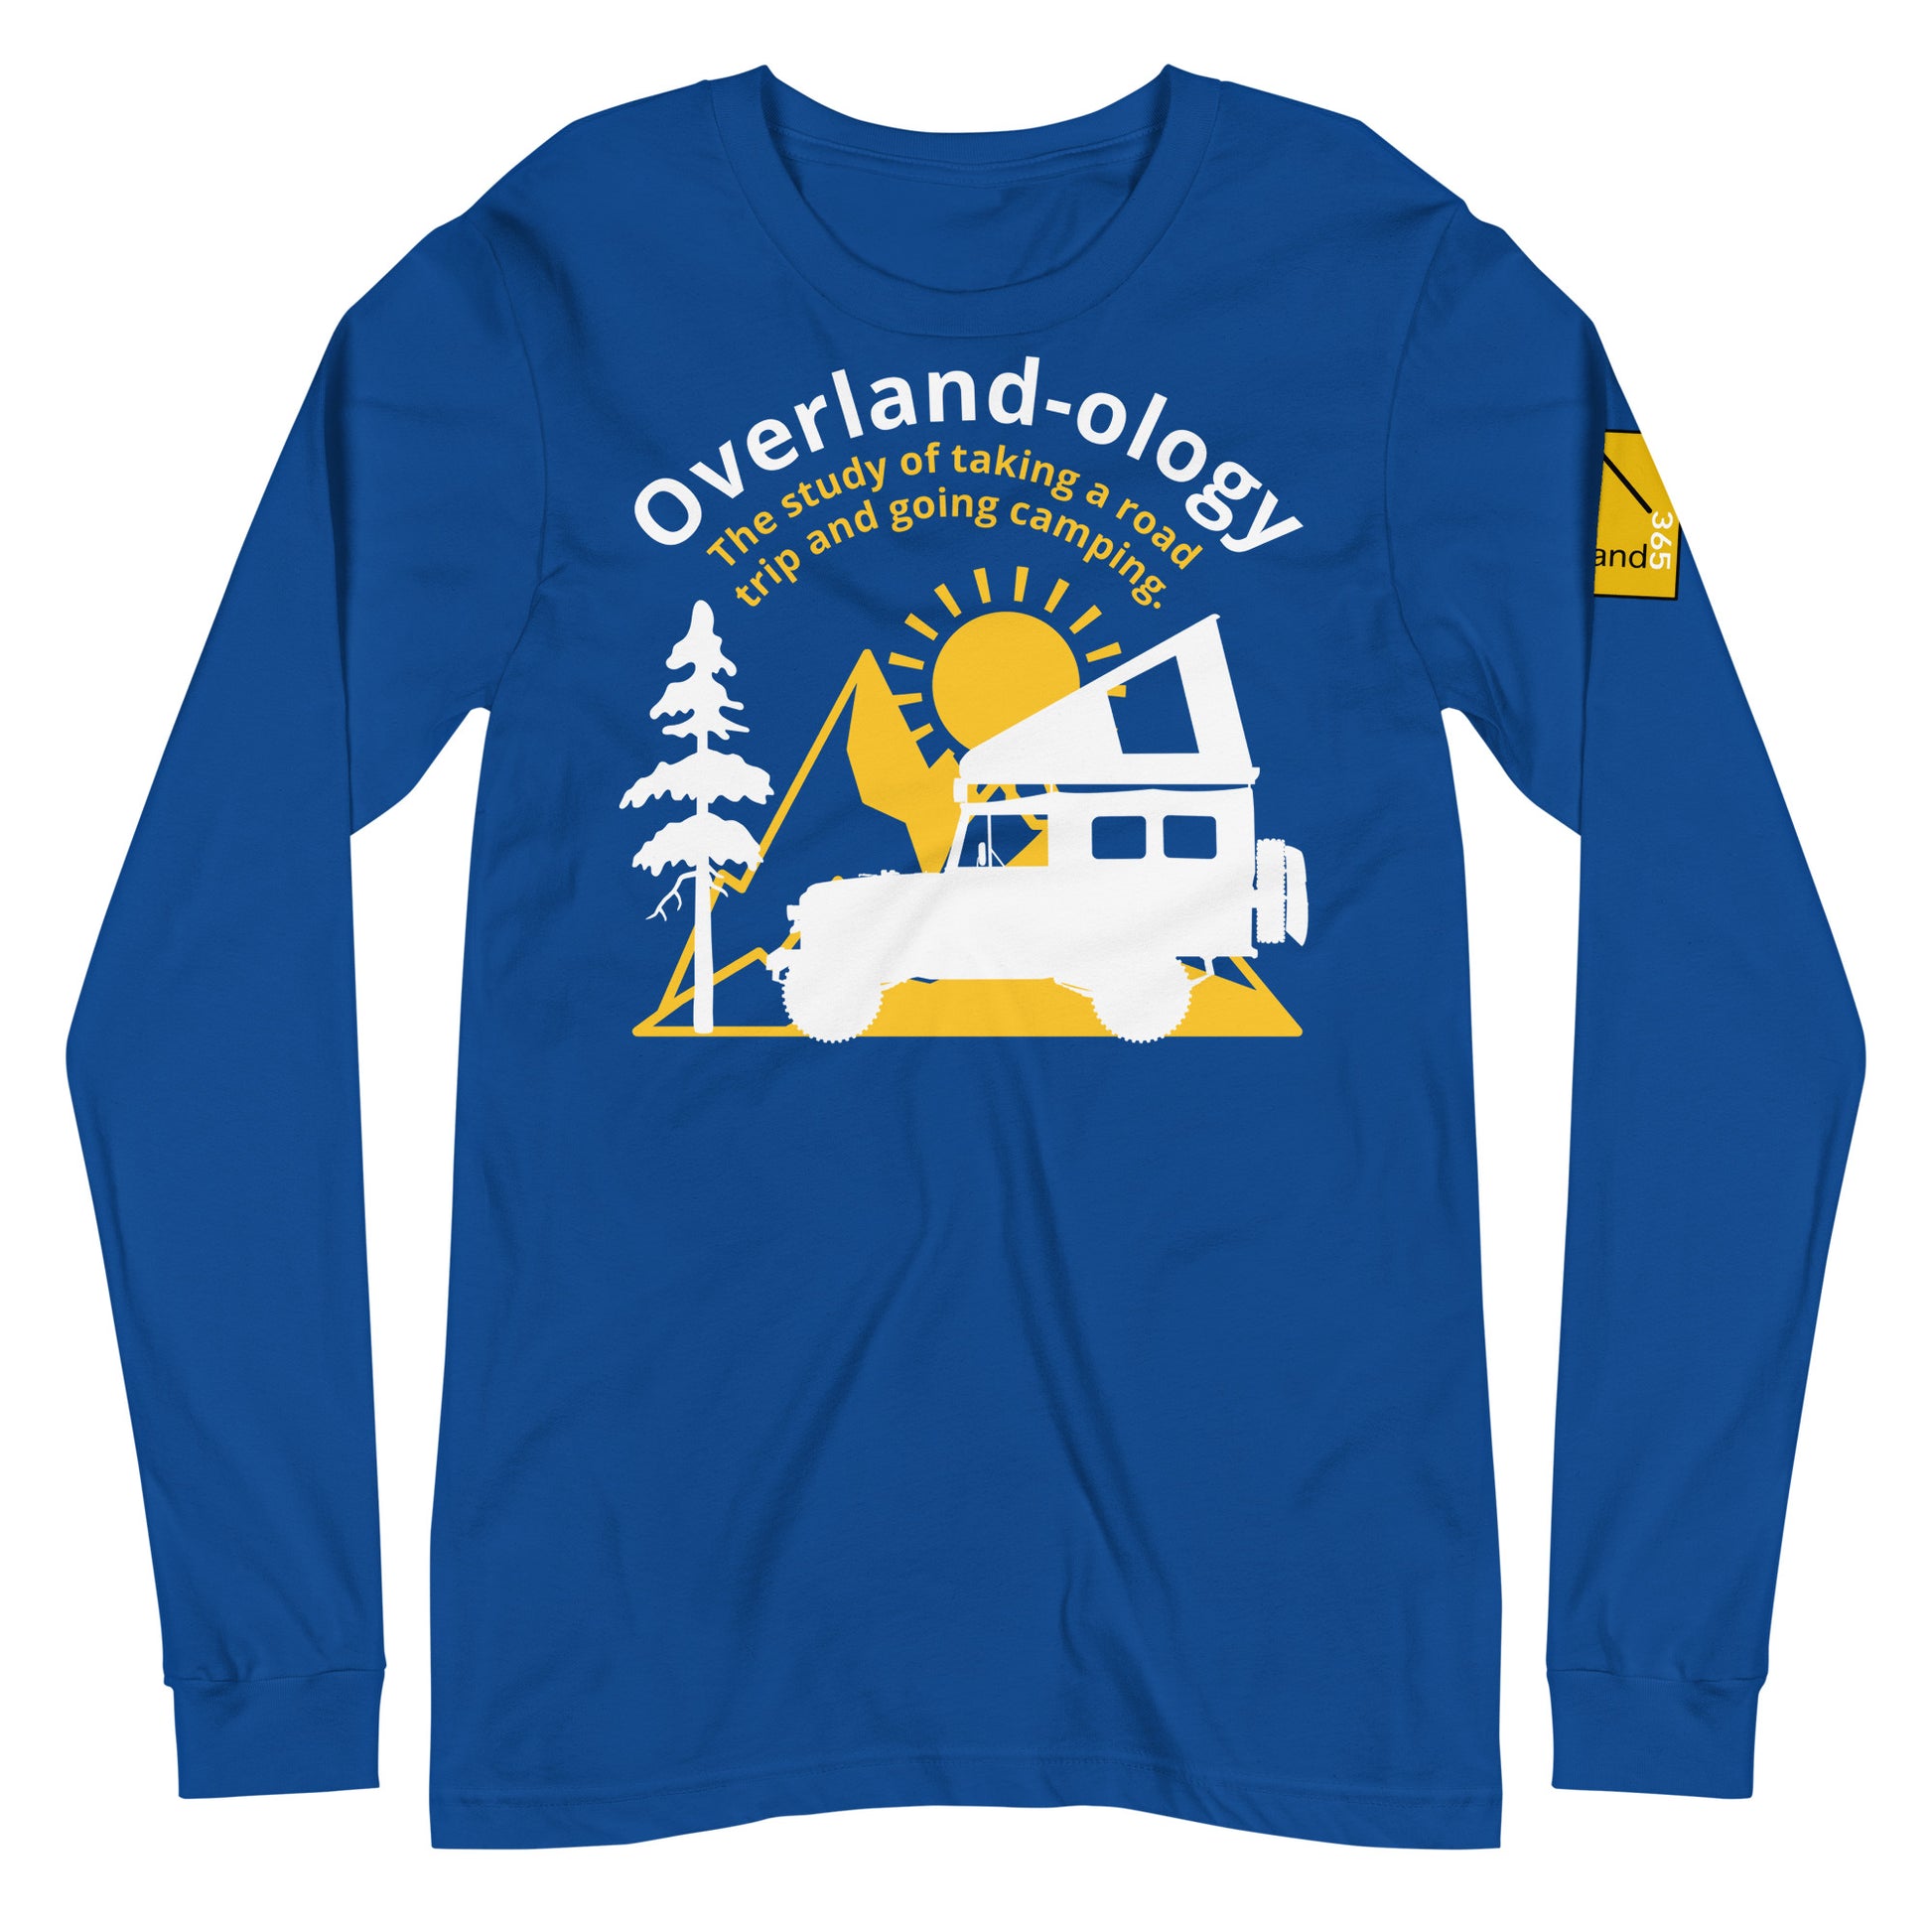 Overland-ology - The study of taking a road trip and going camping. Blue long-sleeve. overland365.com